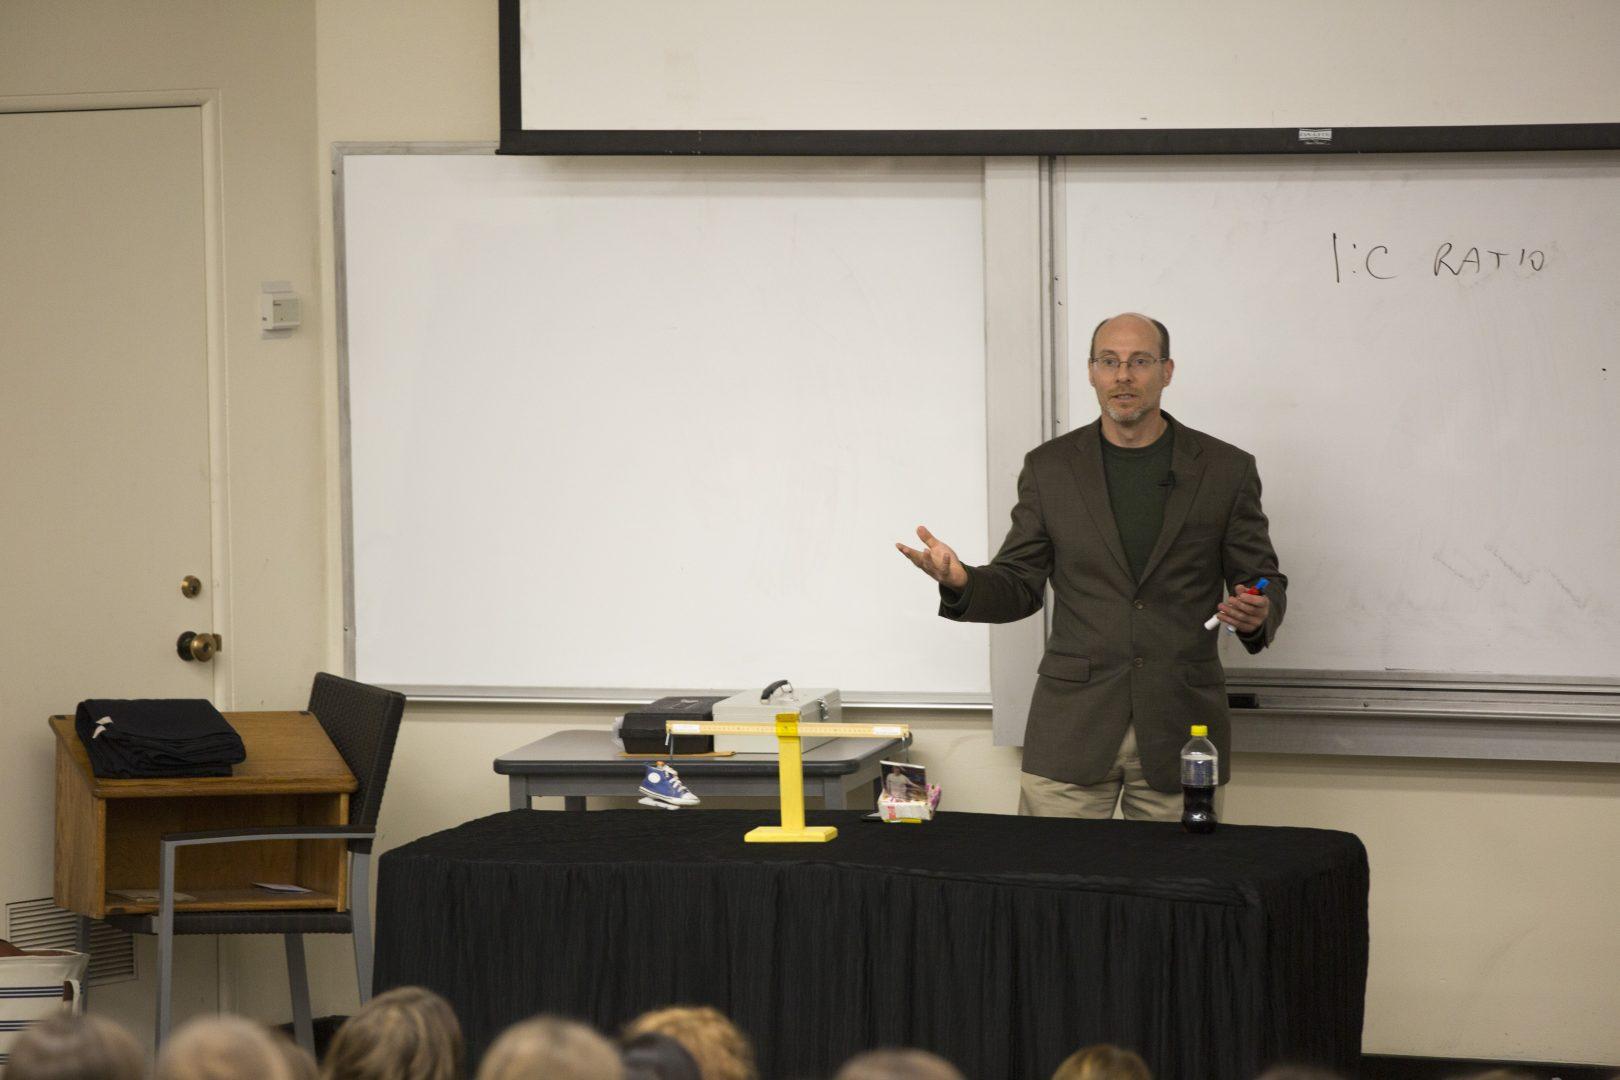 More than a hundred students, practitioners and members of the diabetic community attended a the lecture, which featured award-winning diabetes educator Gary Scheiner on Wednesday Nov. 15, 2017. (Daniel Avalos/The Collegian)